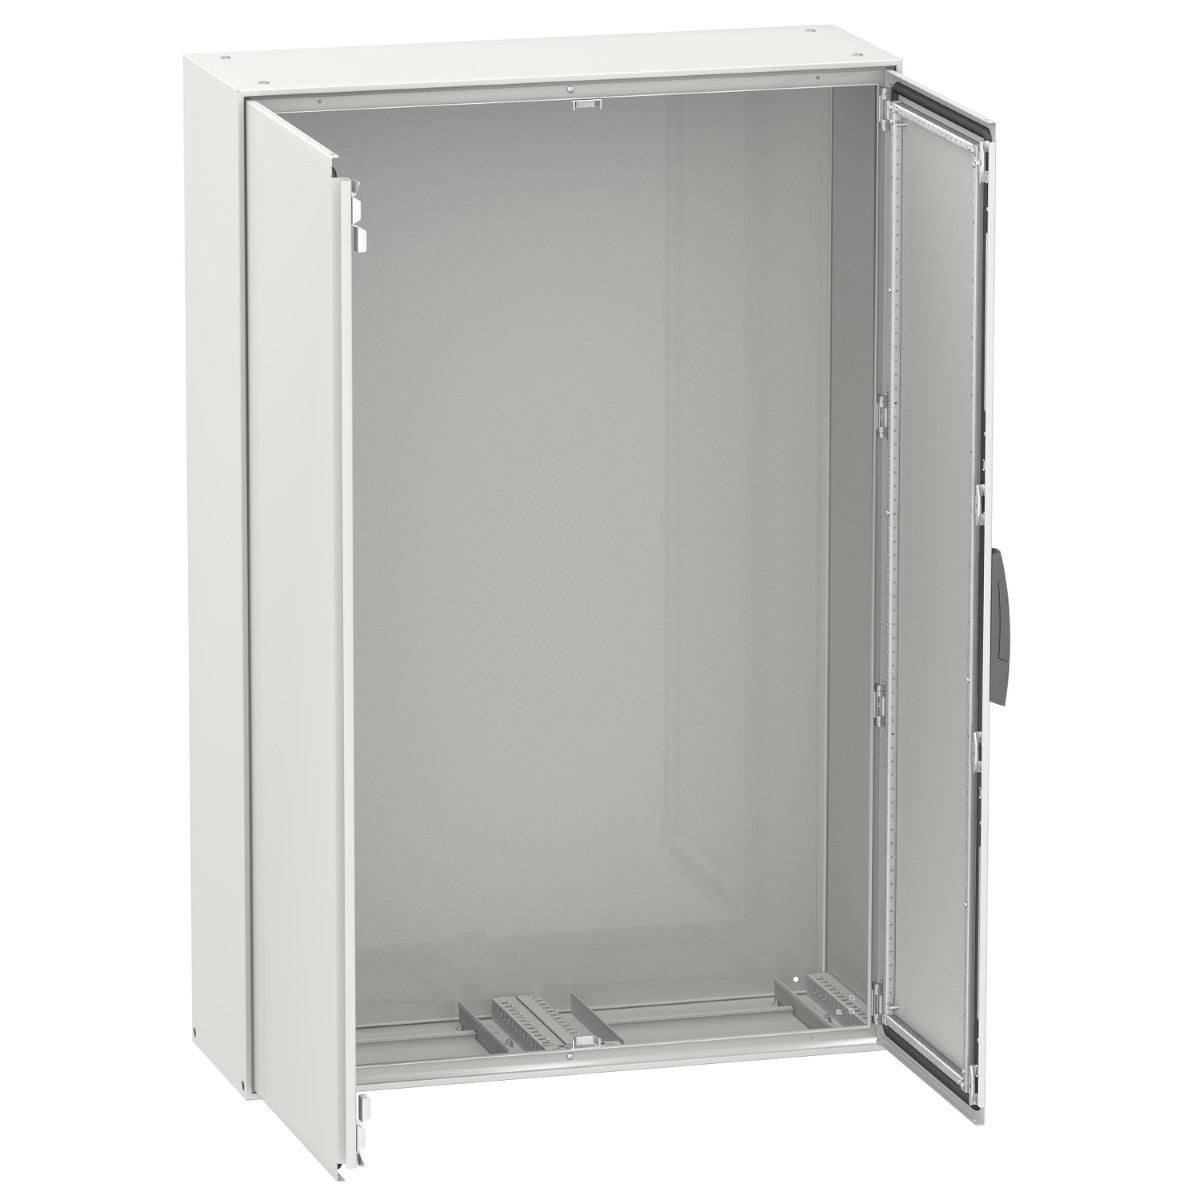 Spacial SM compact enclosure without mounting plate - 2000x1200x600 mm